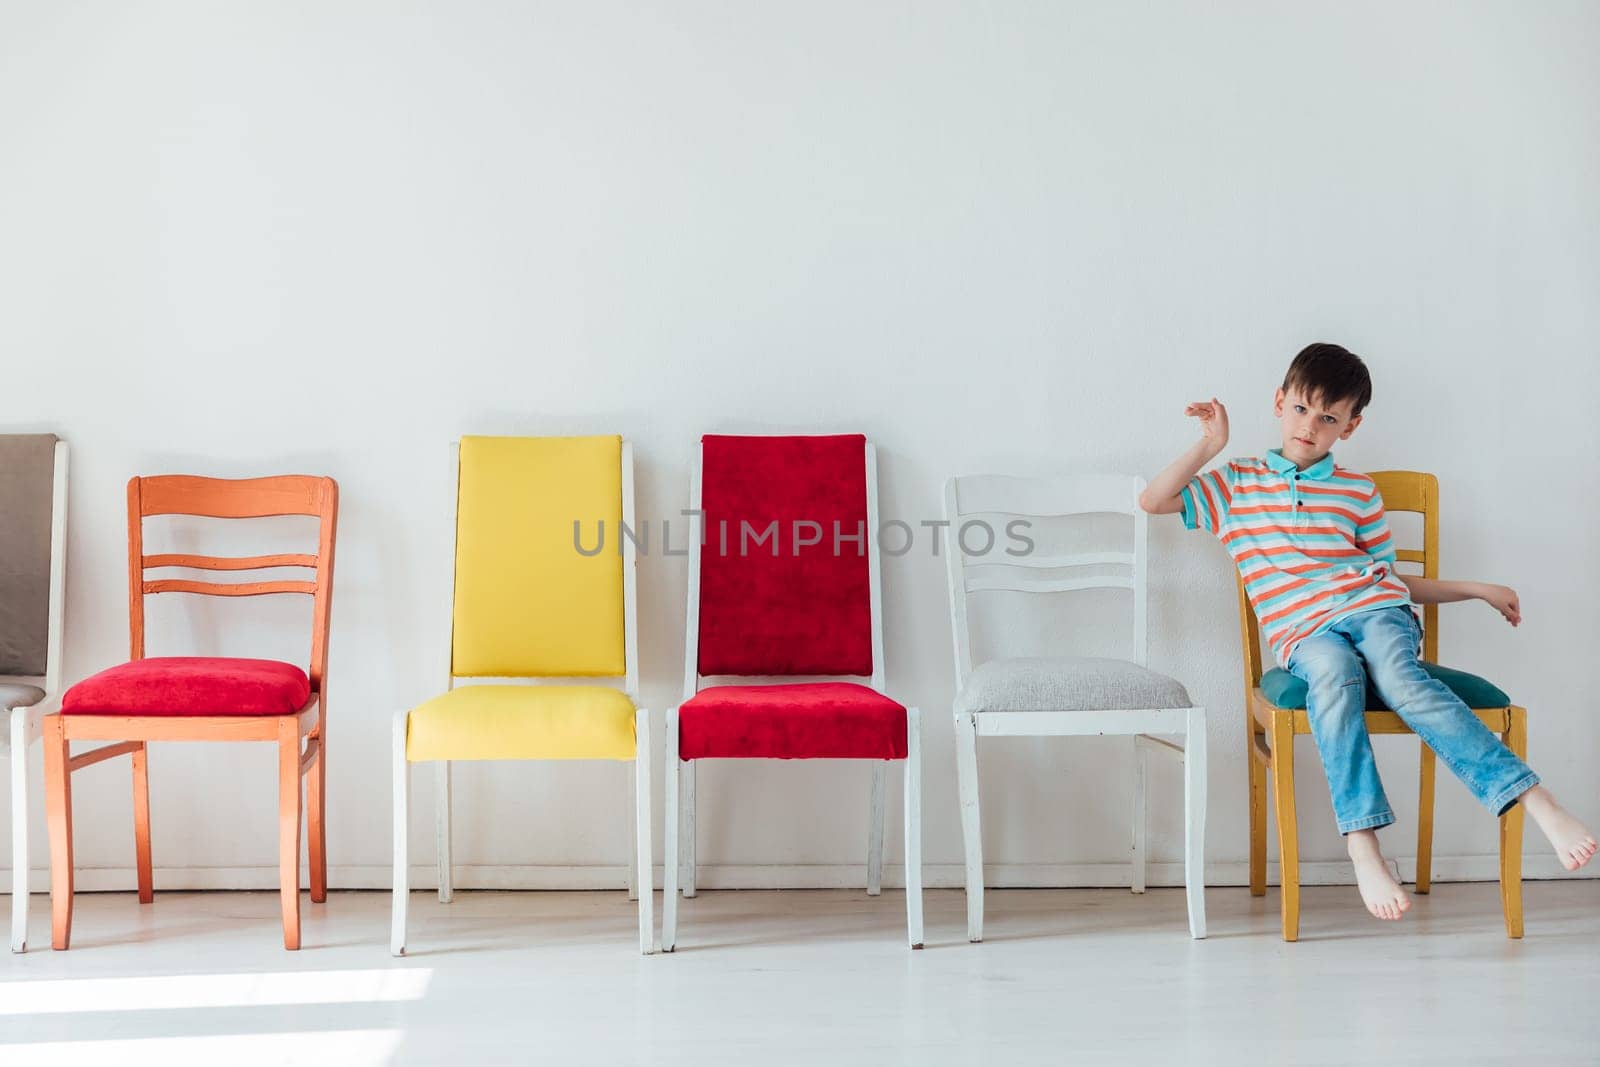 A 7-year-old boy and many different chairs in the interior of a white room